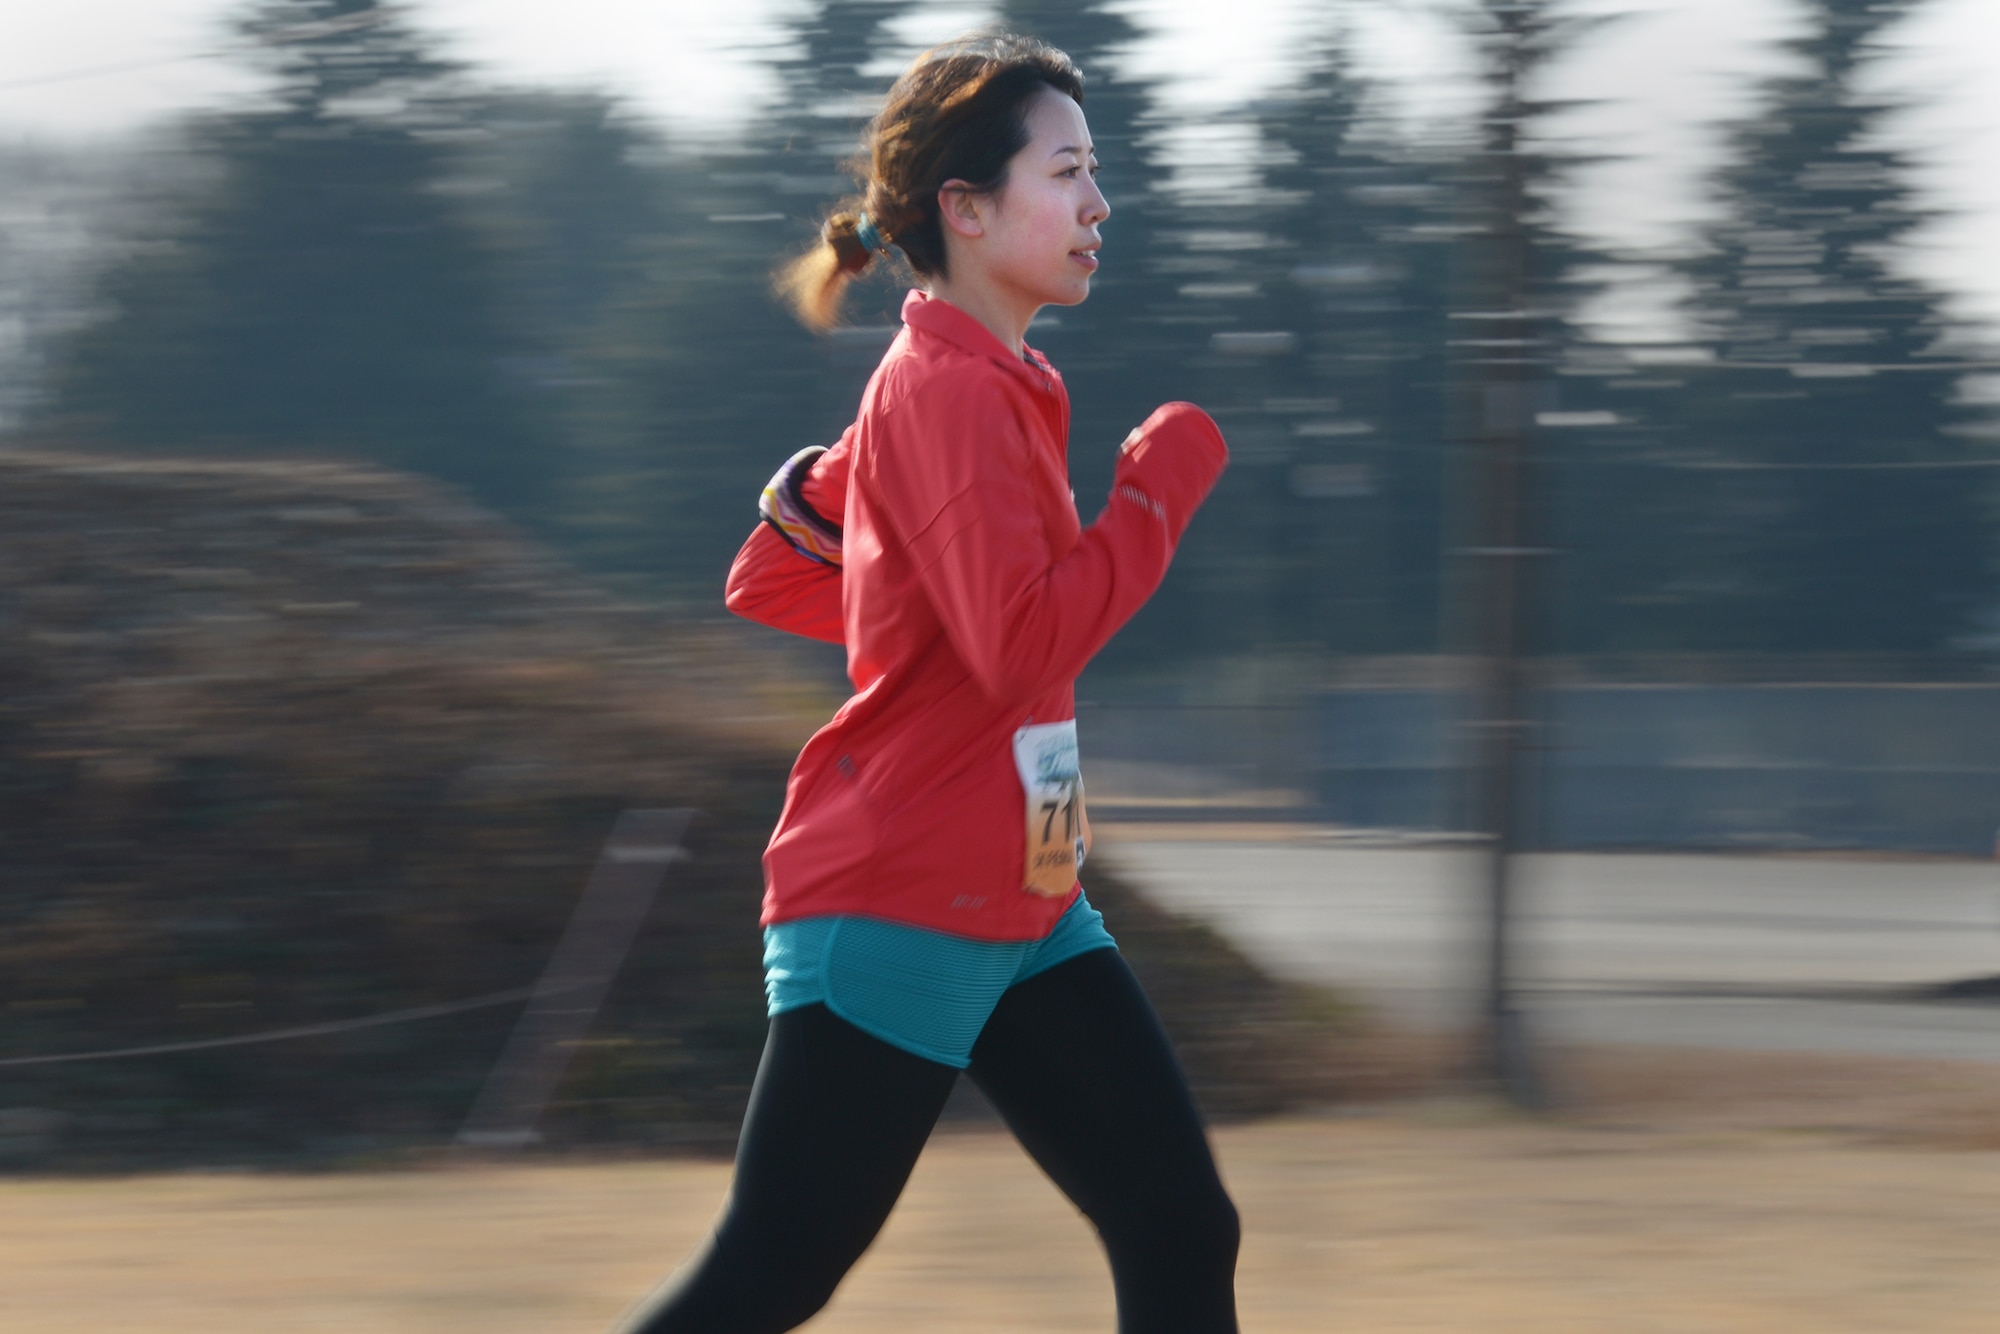 A participant runs in the 5k race during the 35th Annual Frostbite Run at Yokota Air
Base, Japan, Jan. 17, 2016. The event included two 2k runs, a 5k and a half marathon,
allowing participants to register for a casual or challenging run. (U.S. Air Force photo by
Staff Sgt. Cody H. Ramirez/Released)